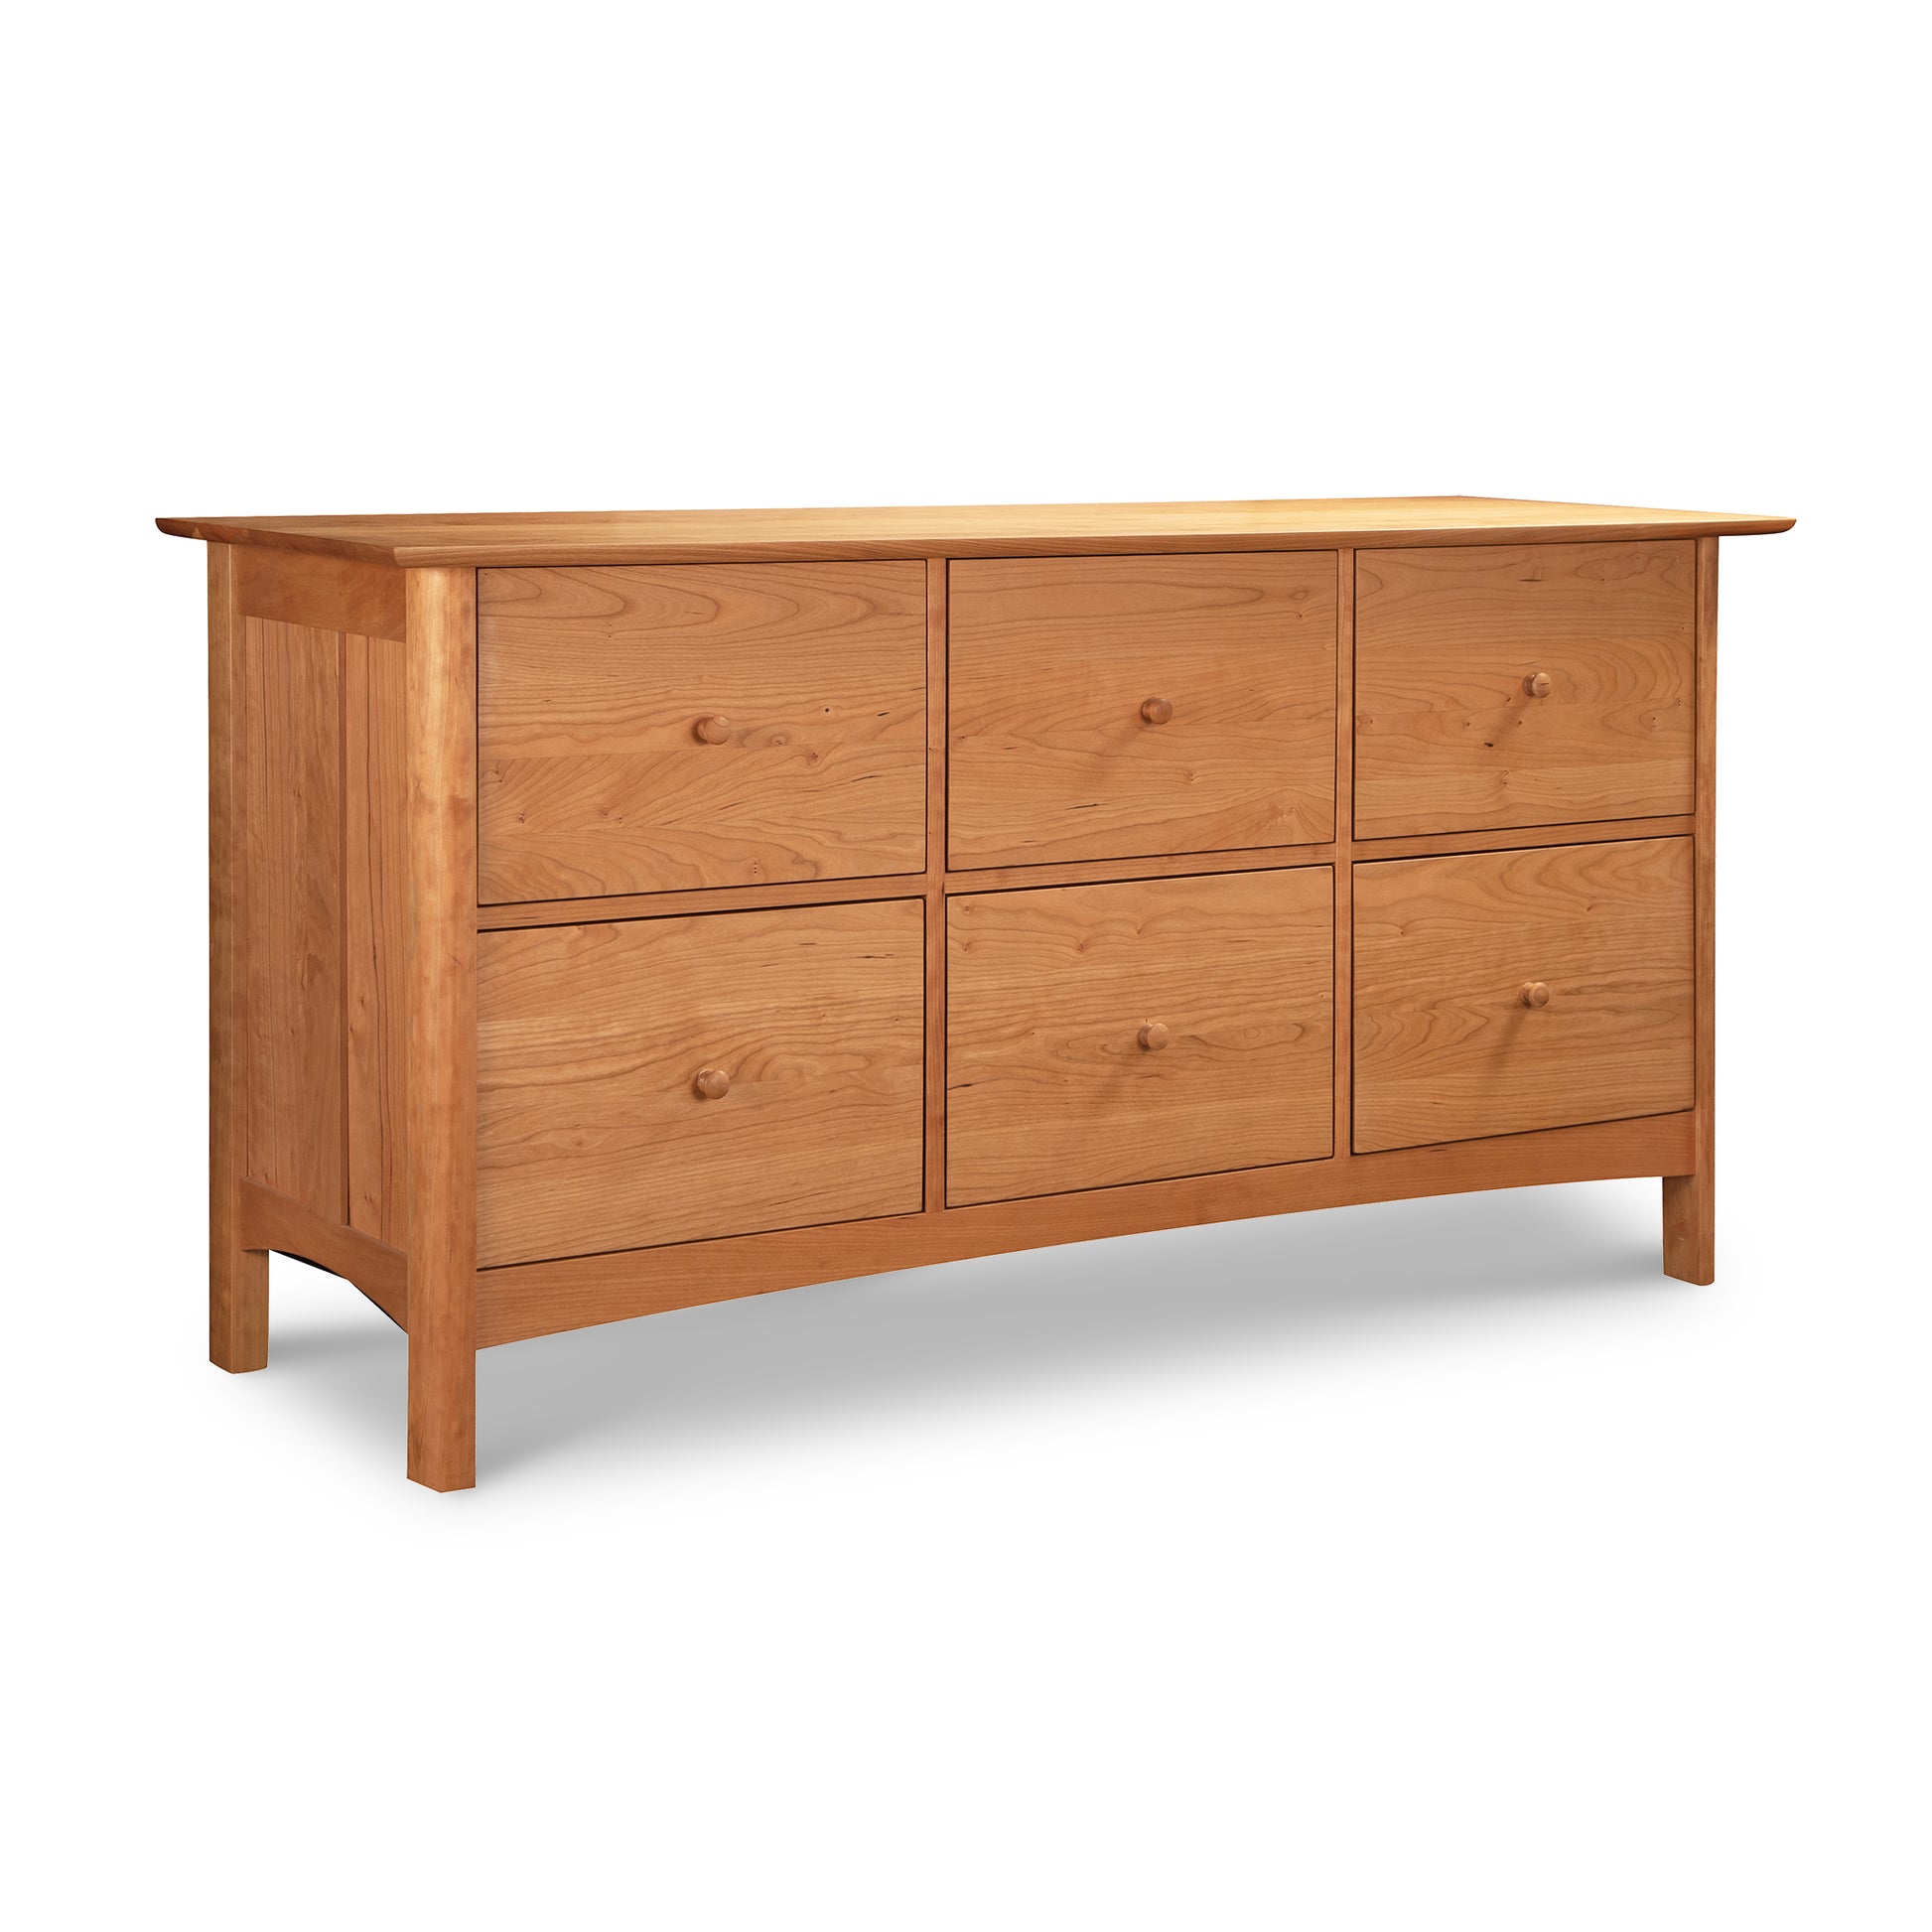 A Heartwood Shaker six-drawer dresser from Vermont Furniture Designs against a white background.